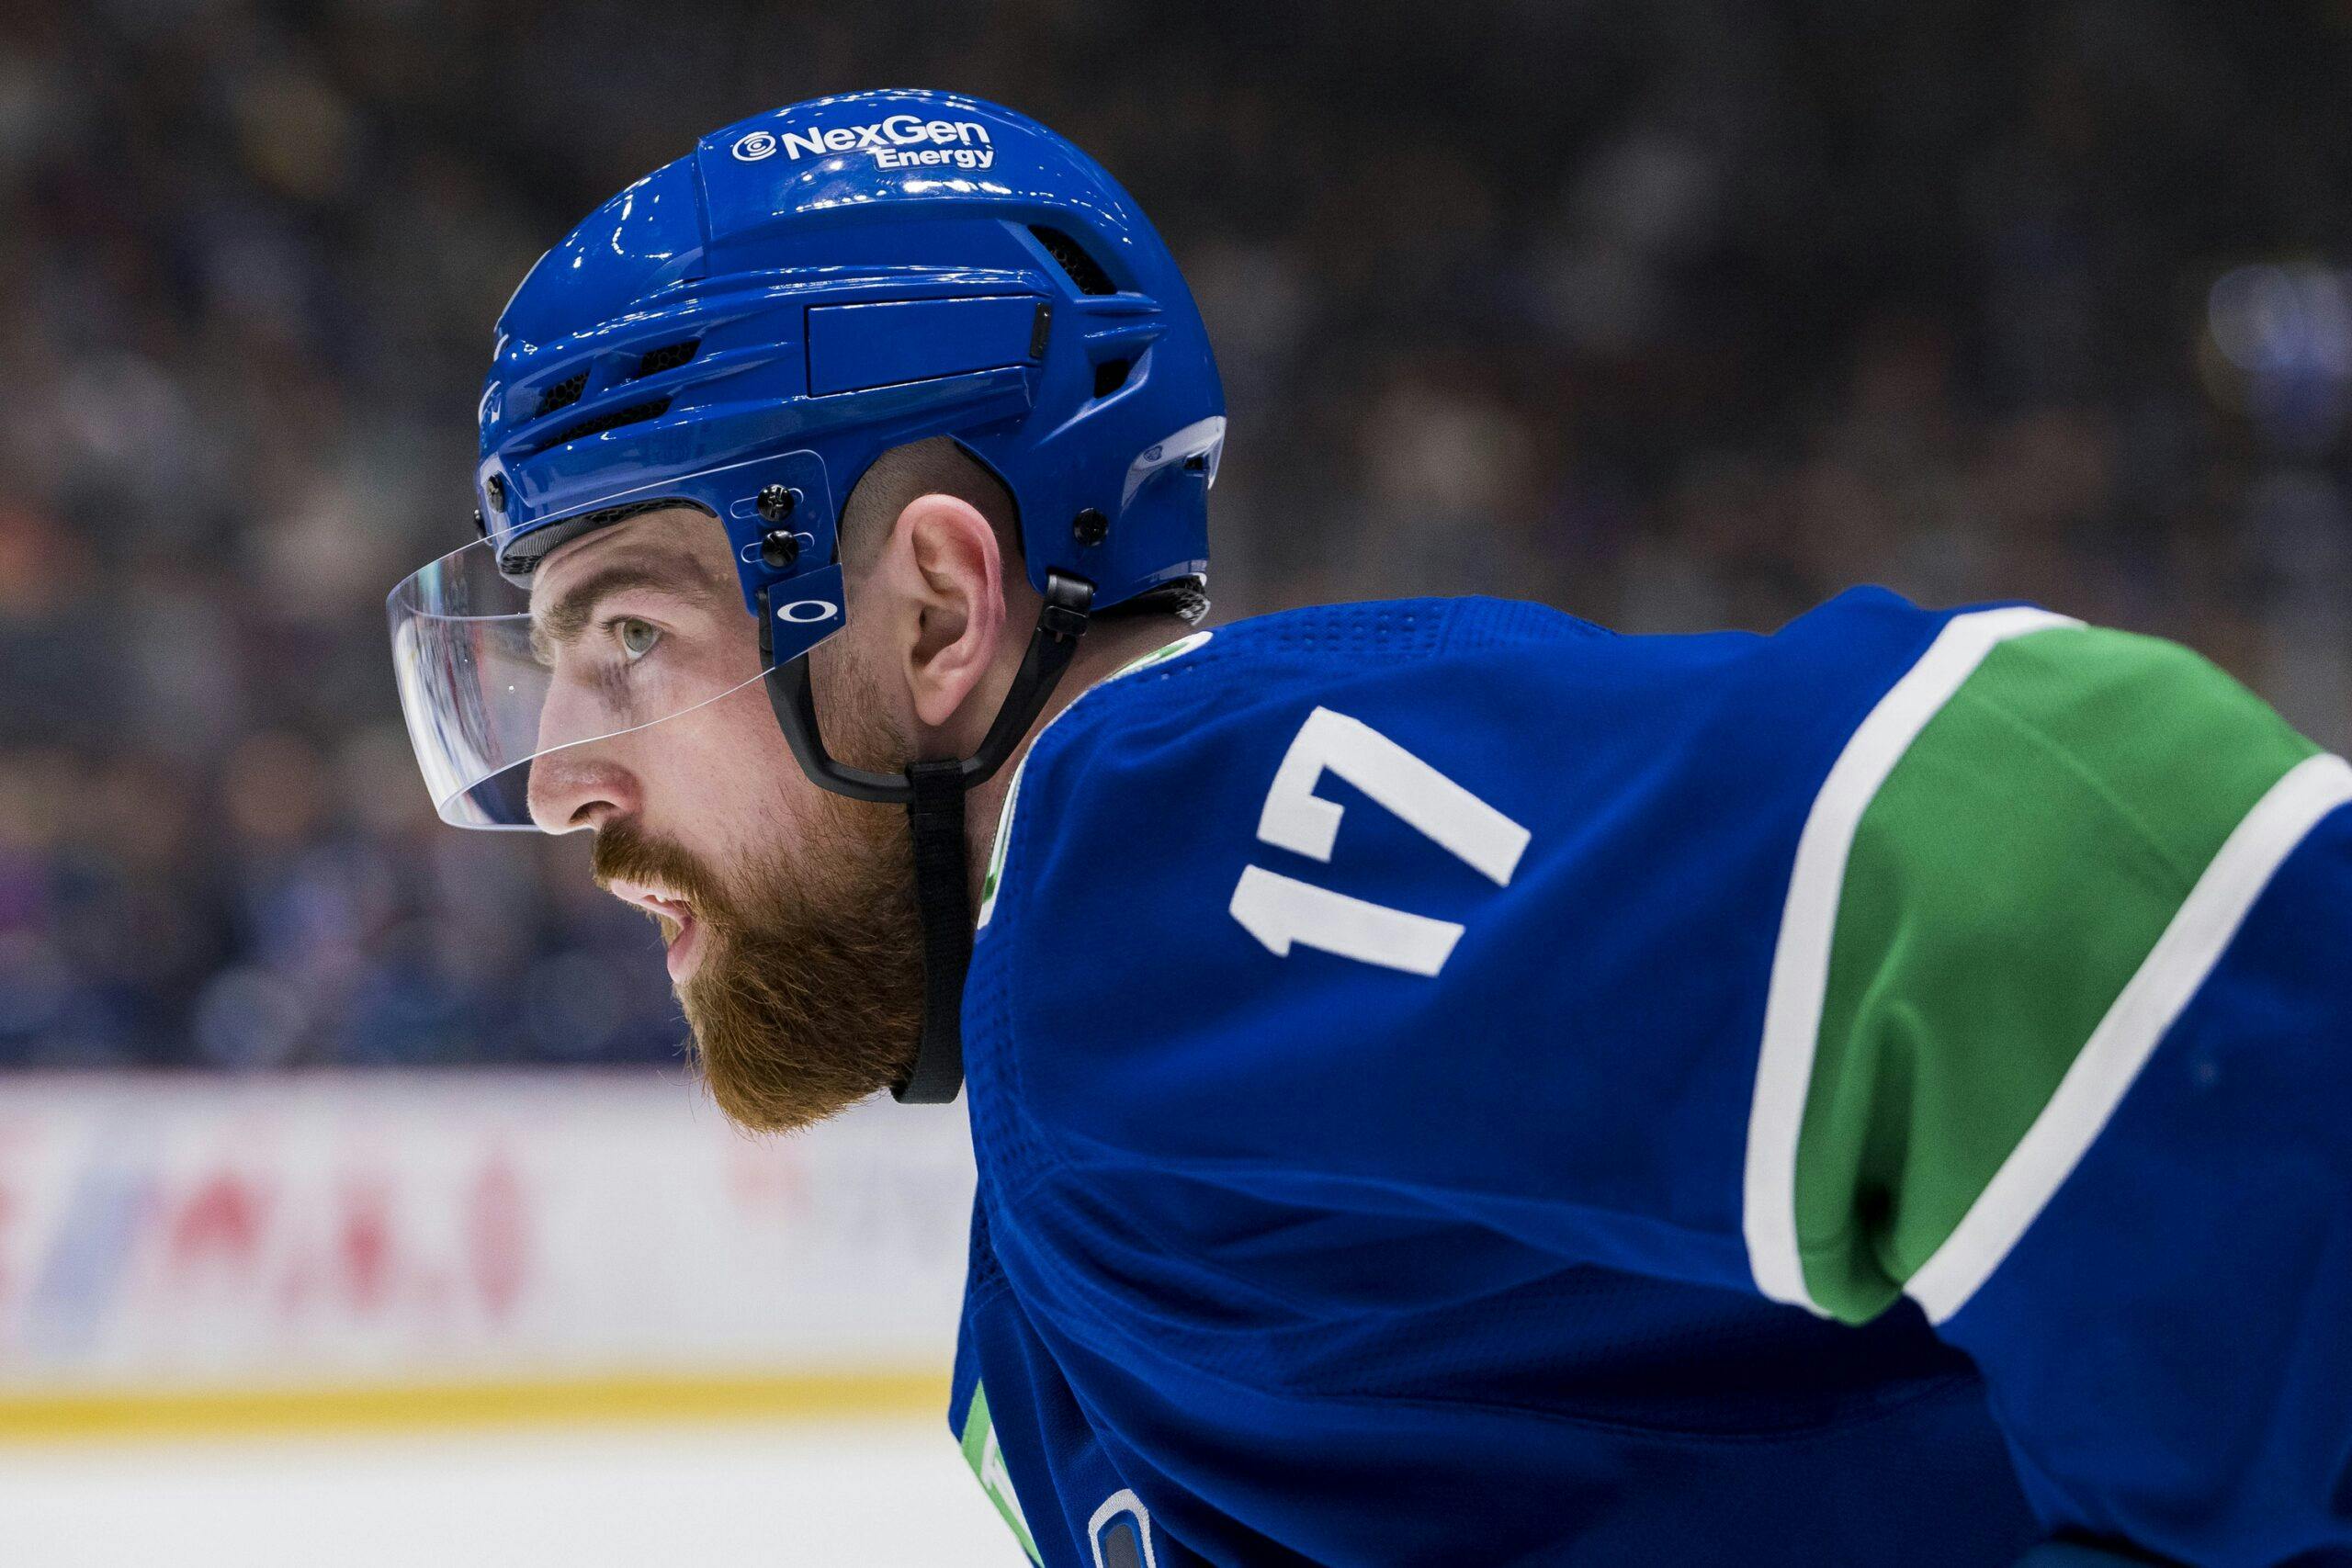 The Canucks roster needs to take a page out of Hoglander's playbook